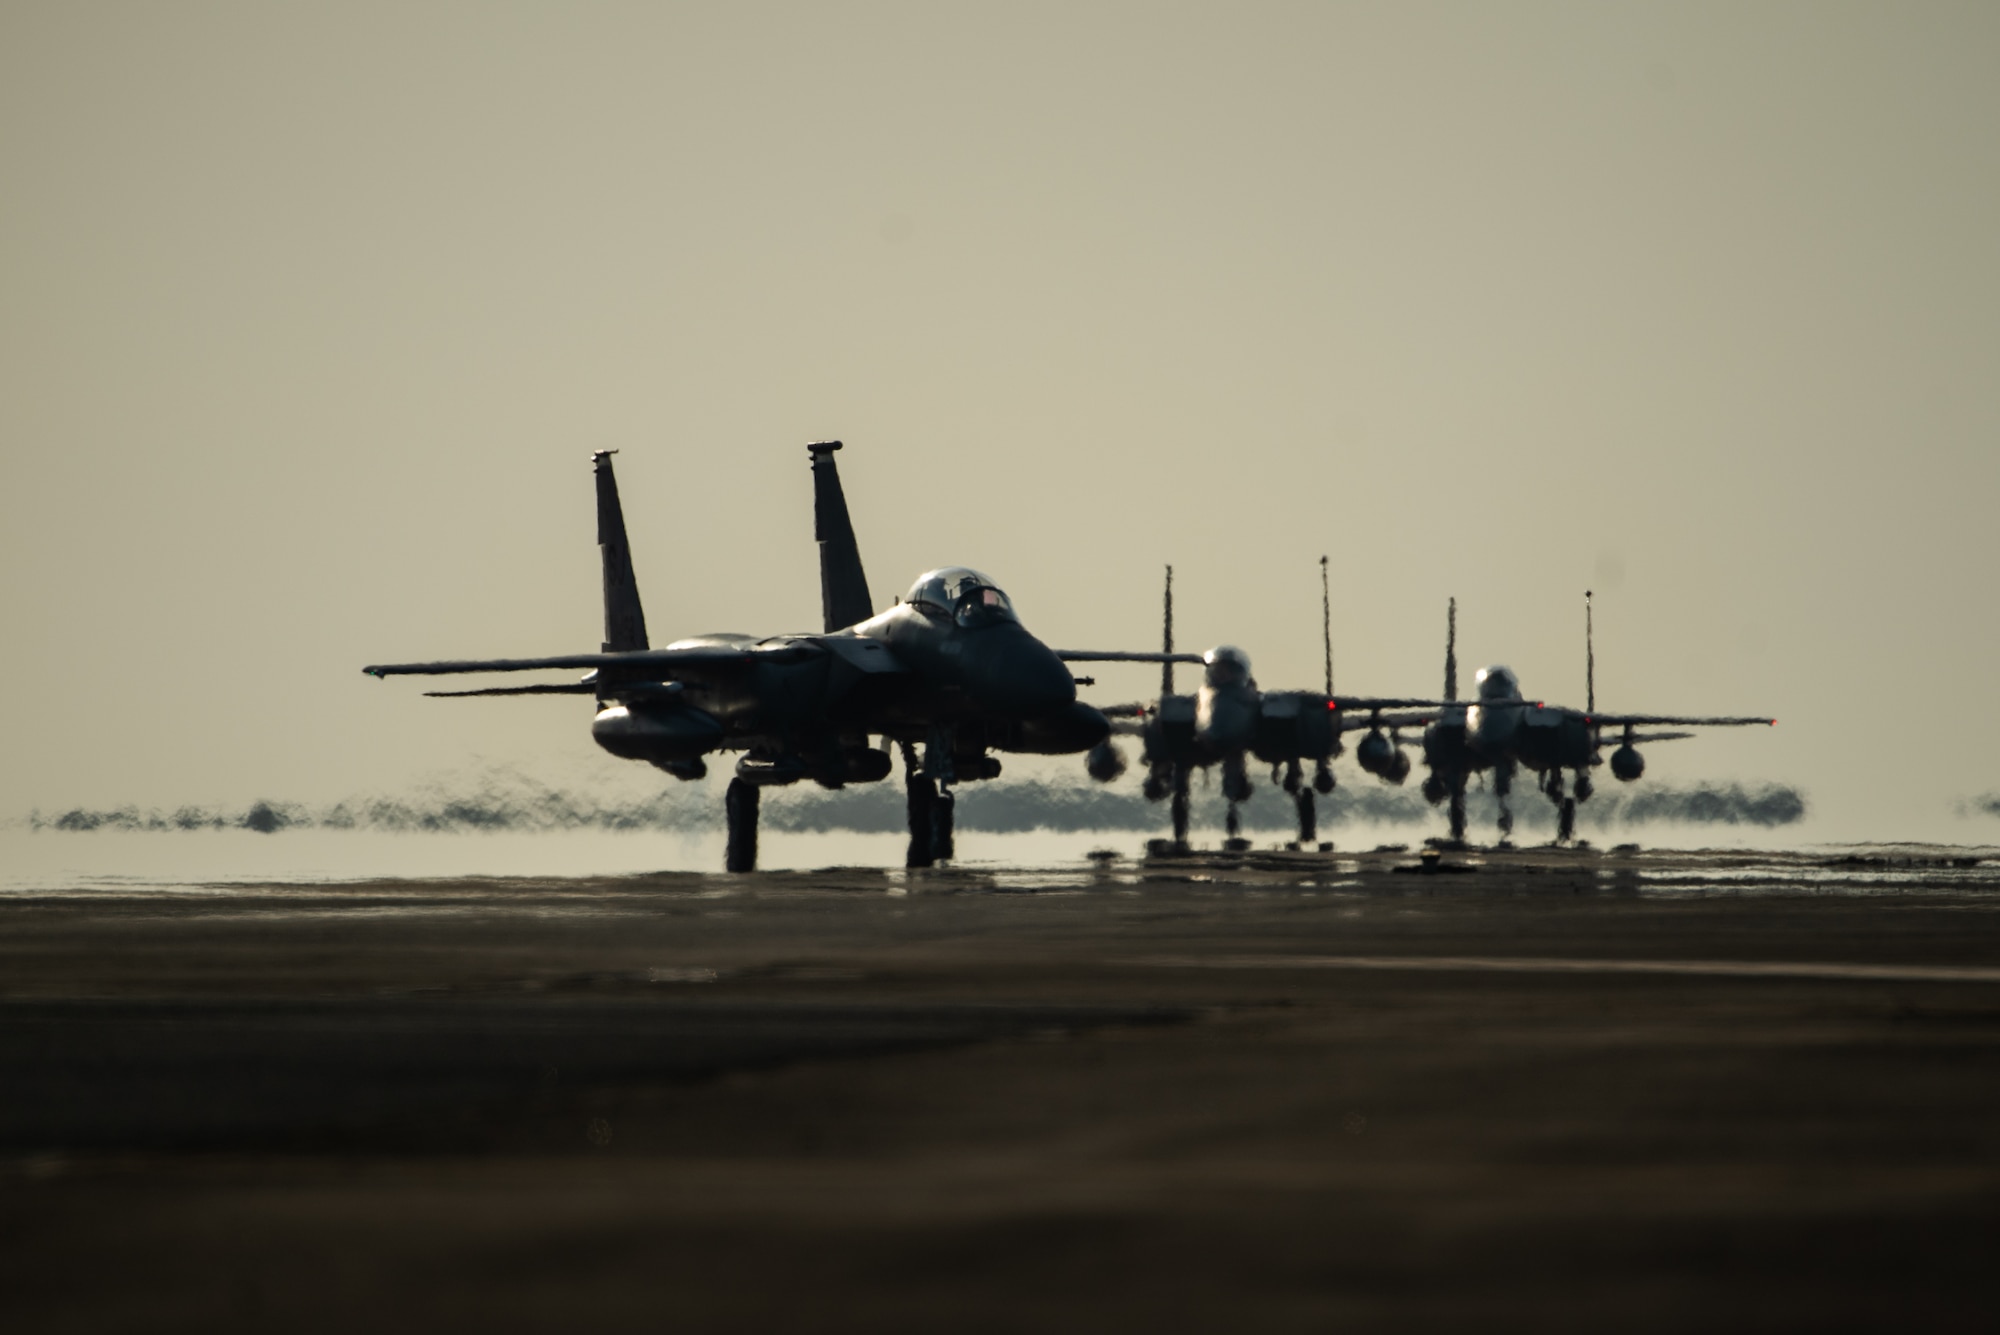 Three F-15E Strike Eagles from the 336th Fighter Squadron, 4th Fighter Wing at Seymour Johnson Air Force Base, North Carolina taxi the runway at Al Dhafra Air Base, United Arab Emirates, June 14, 2019. The F-15E’s joined ADABs inventory of other fighters to include F-15C Eagles and F-35A Lightning IIs. (U.S. Air Force photo by Staff Sgt. Chris Thornbury)